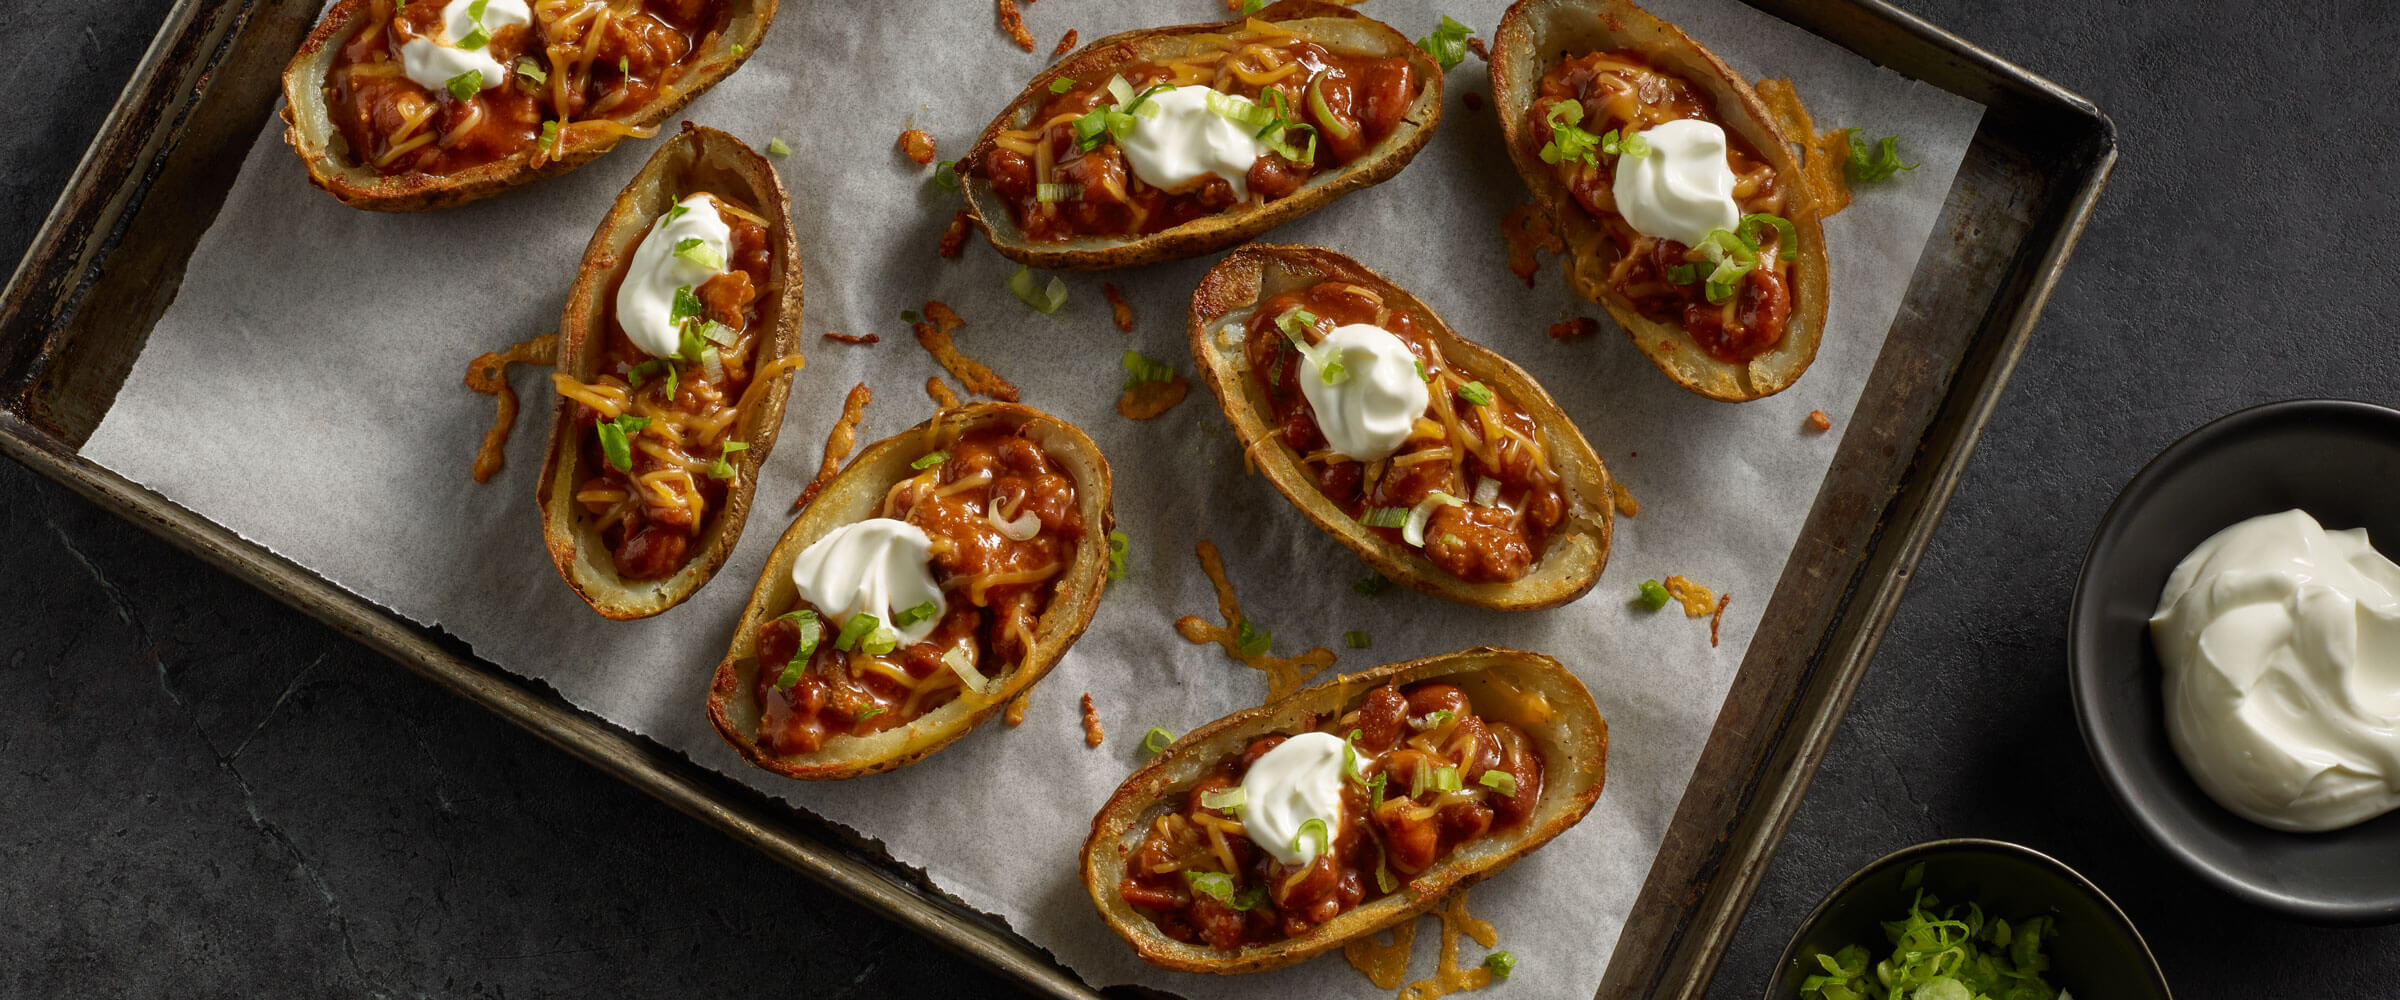 Loaded Baked Potato Skins topped with sour cream on sheet pan